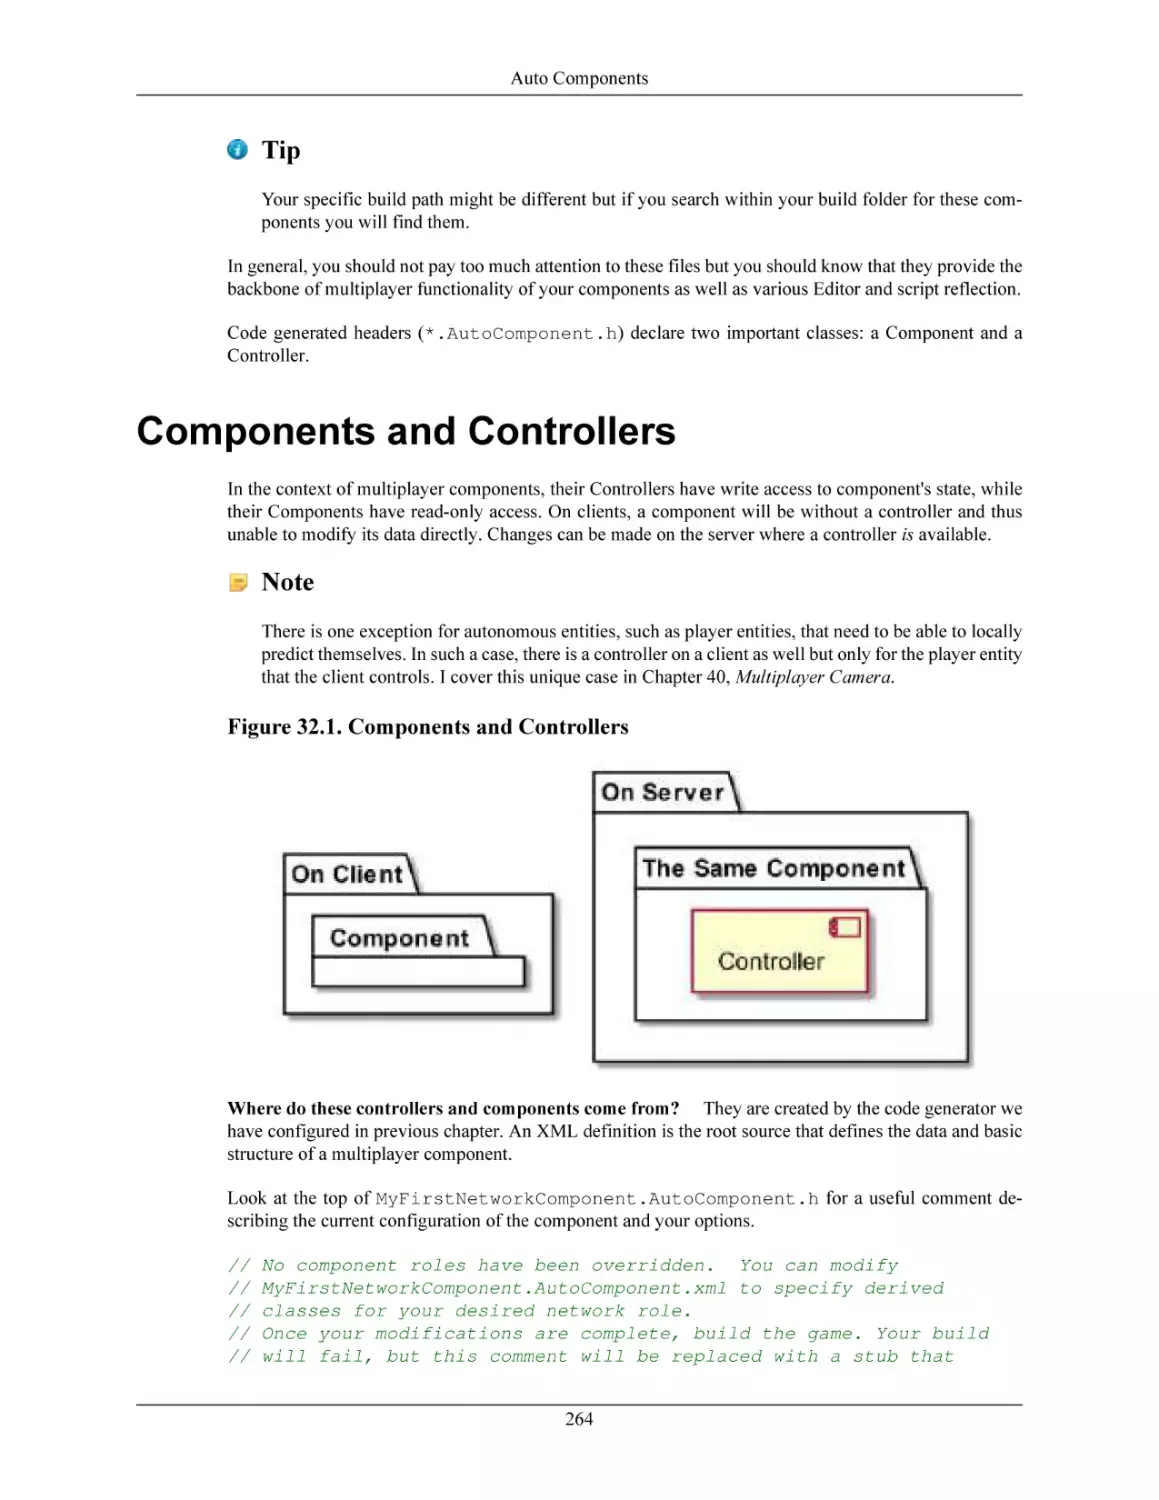 Components and Controllers